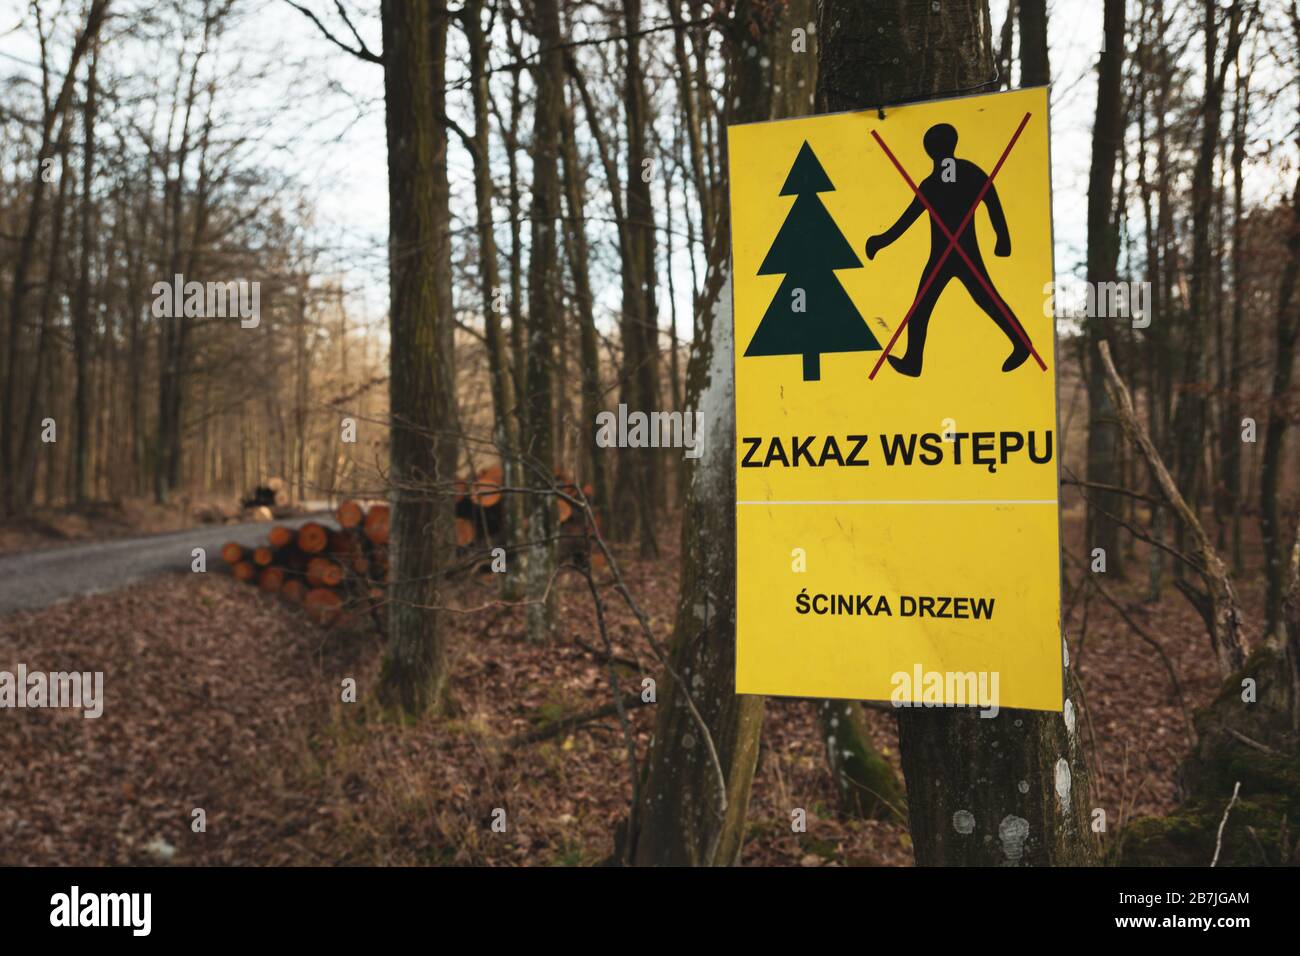 Warning sign in Polish, no entry, felling trees Stock Photo